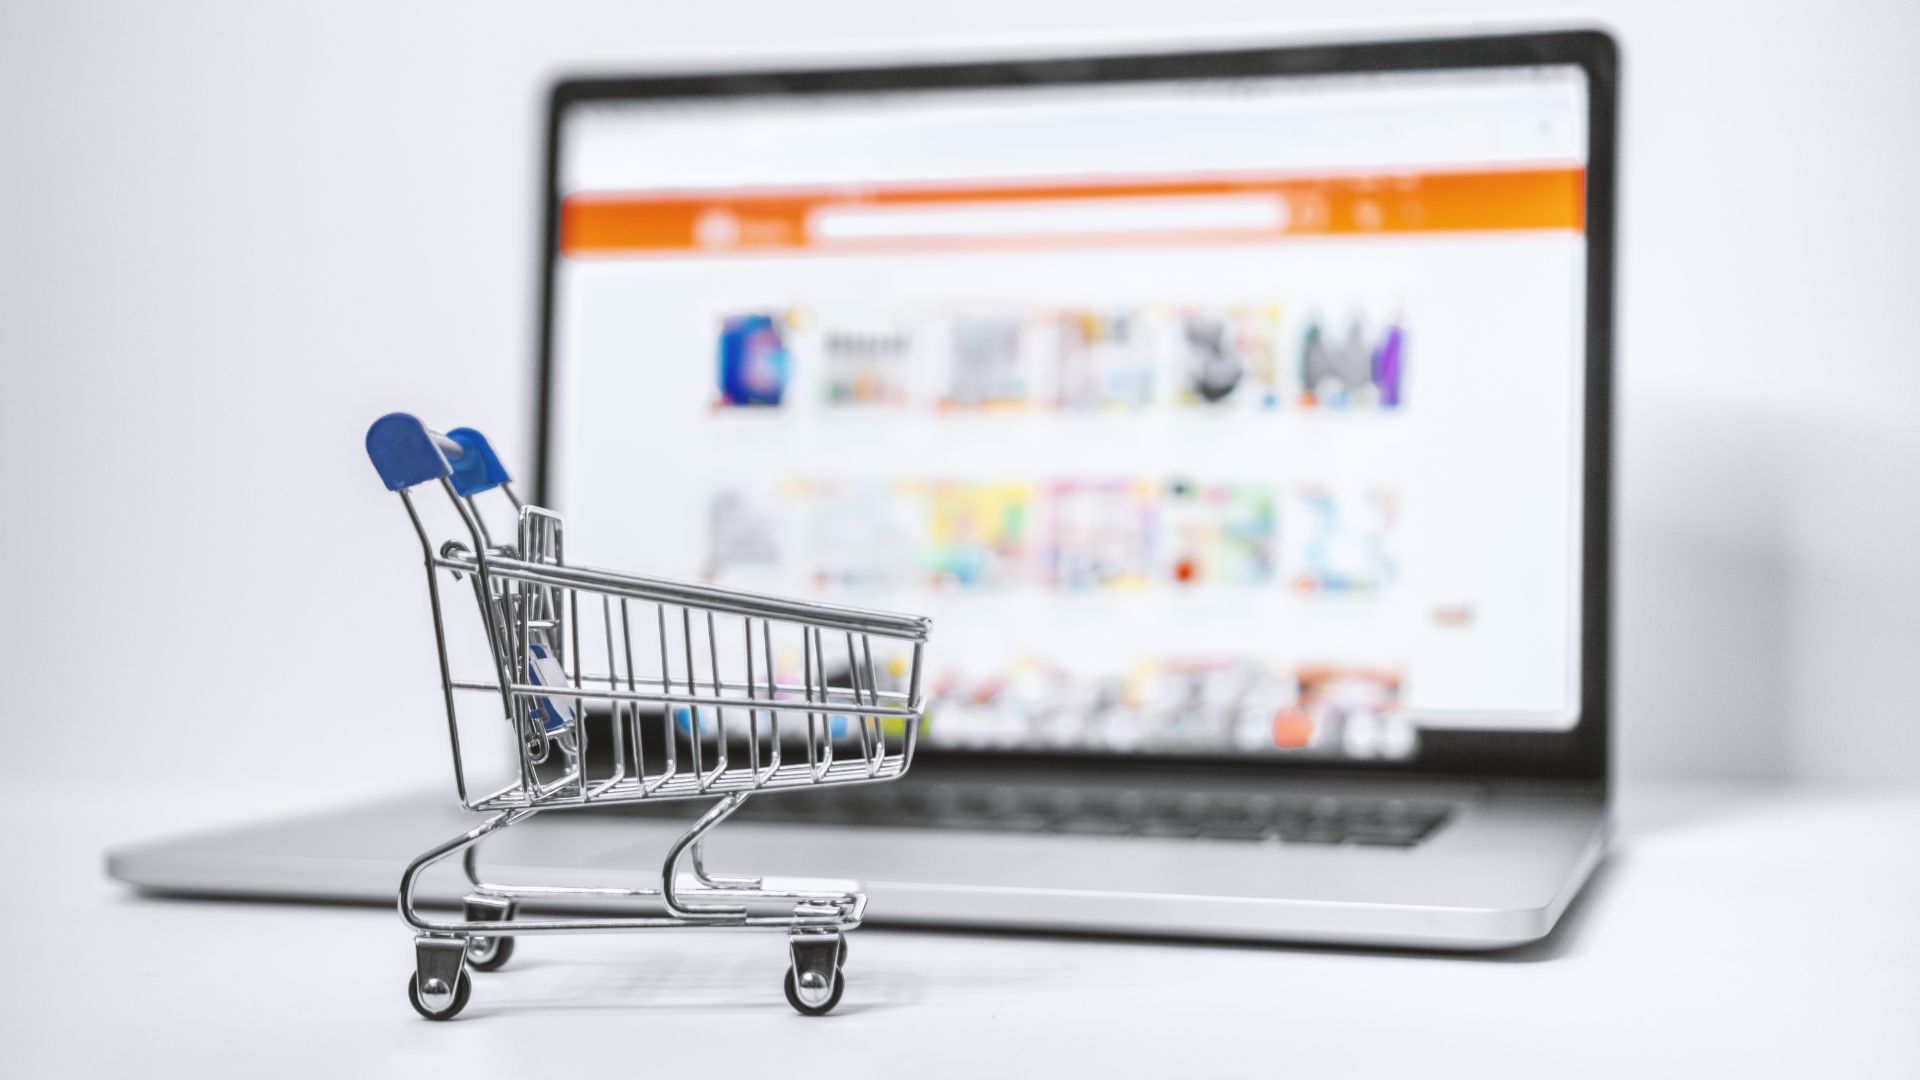 If you want to create marketplace ads, a professional team is needed that can do it, for example, using the services of a trusted digital agency and experts in their fields, there is a blue shopping troly that is commonly used for grocery shopping